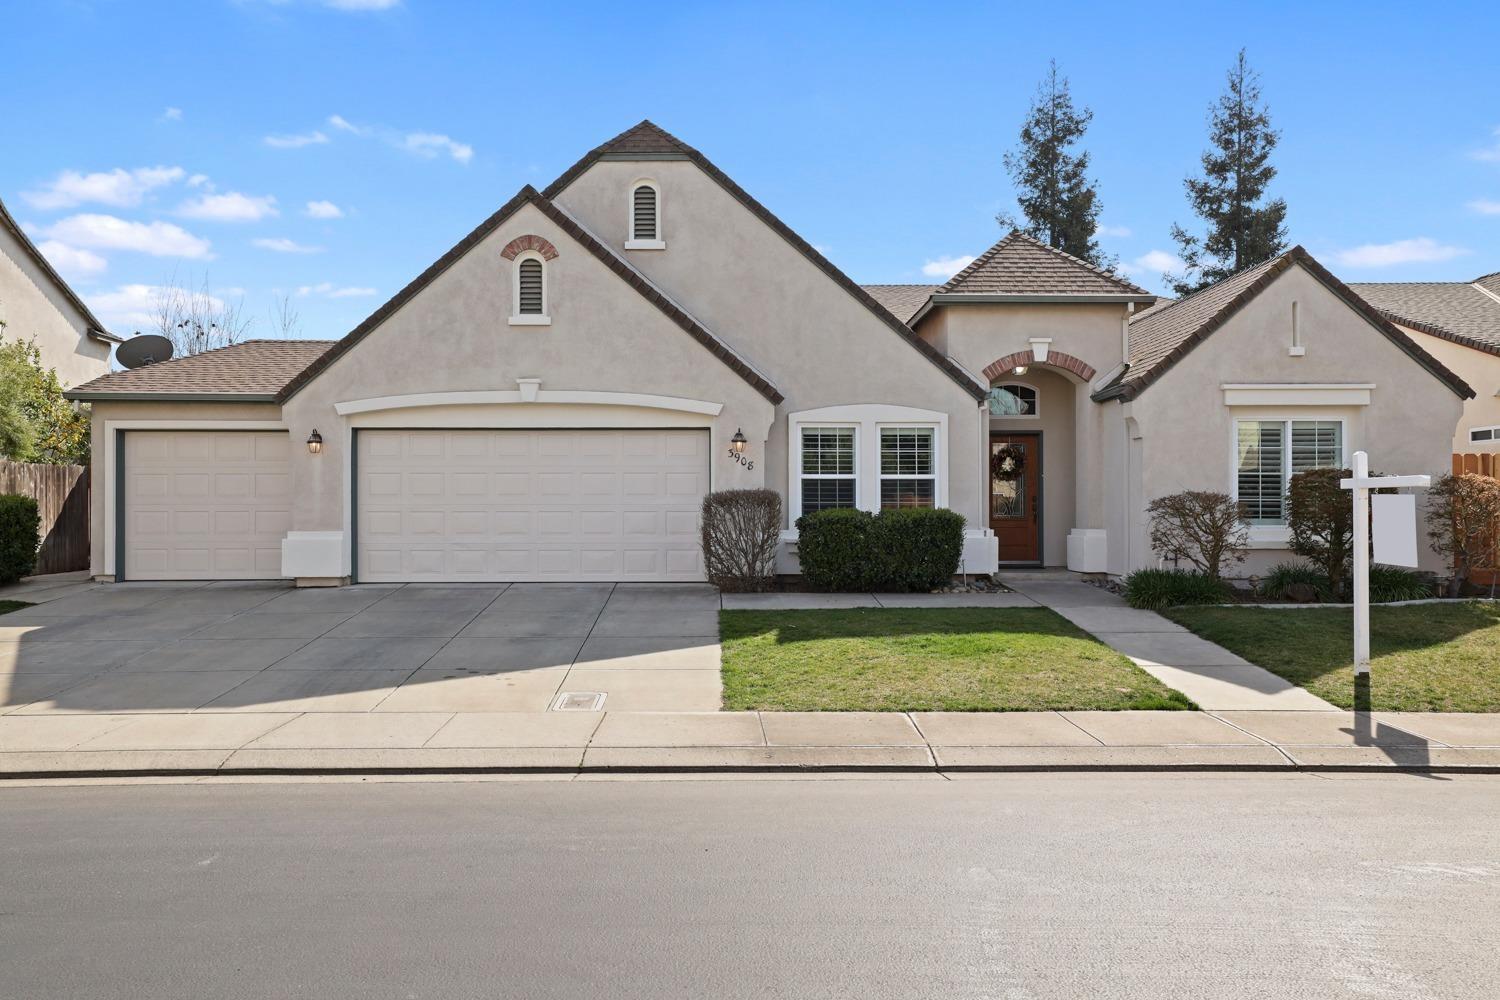 Welcome to the LOVELY and CLEAN single-story home located in the SIENA gated community!